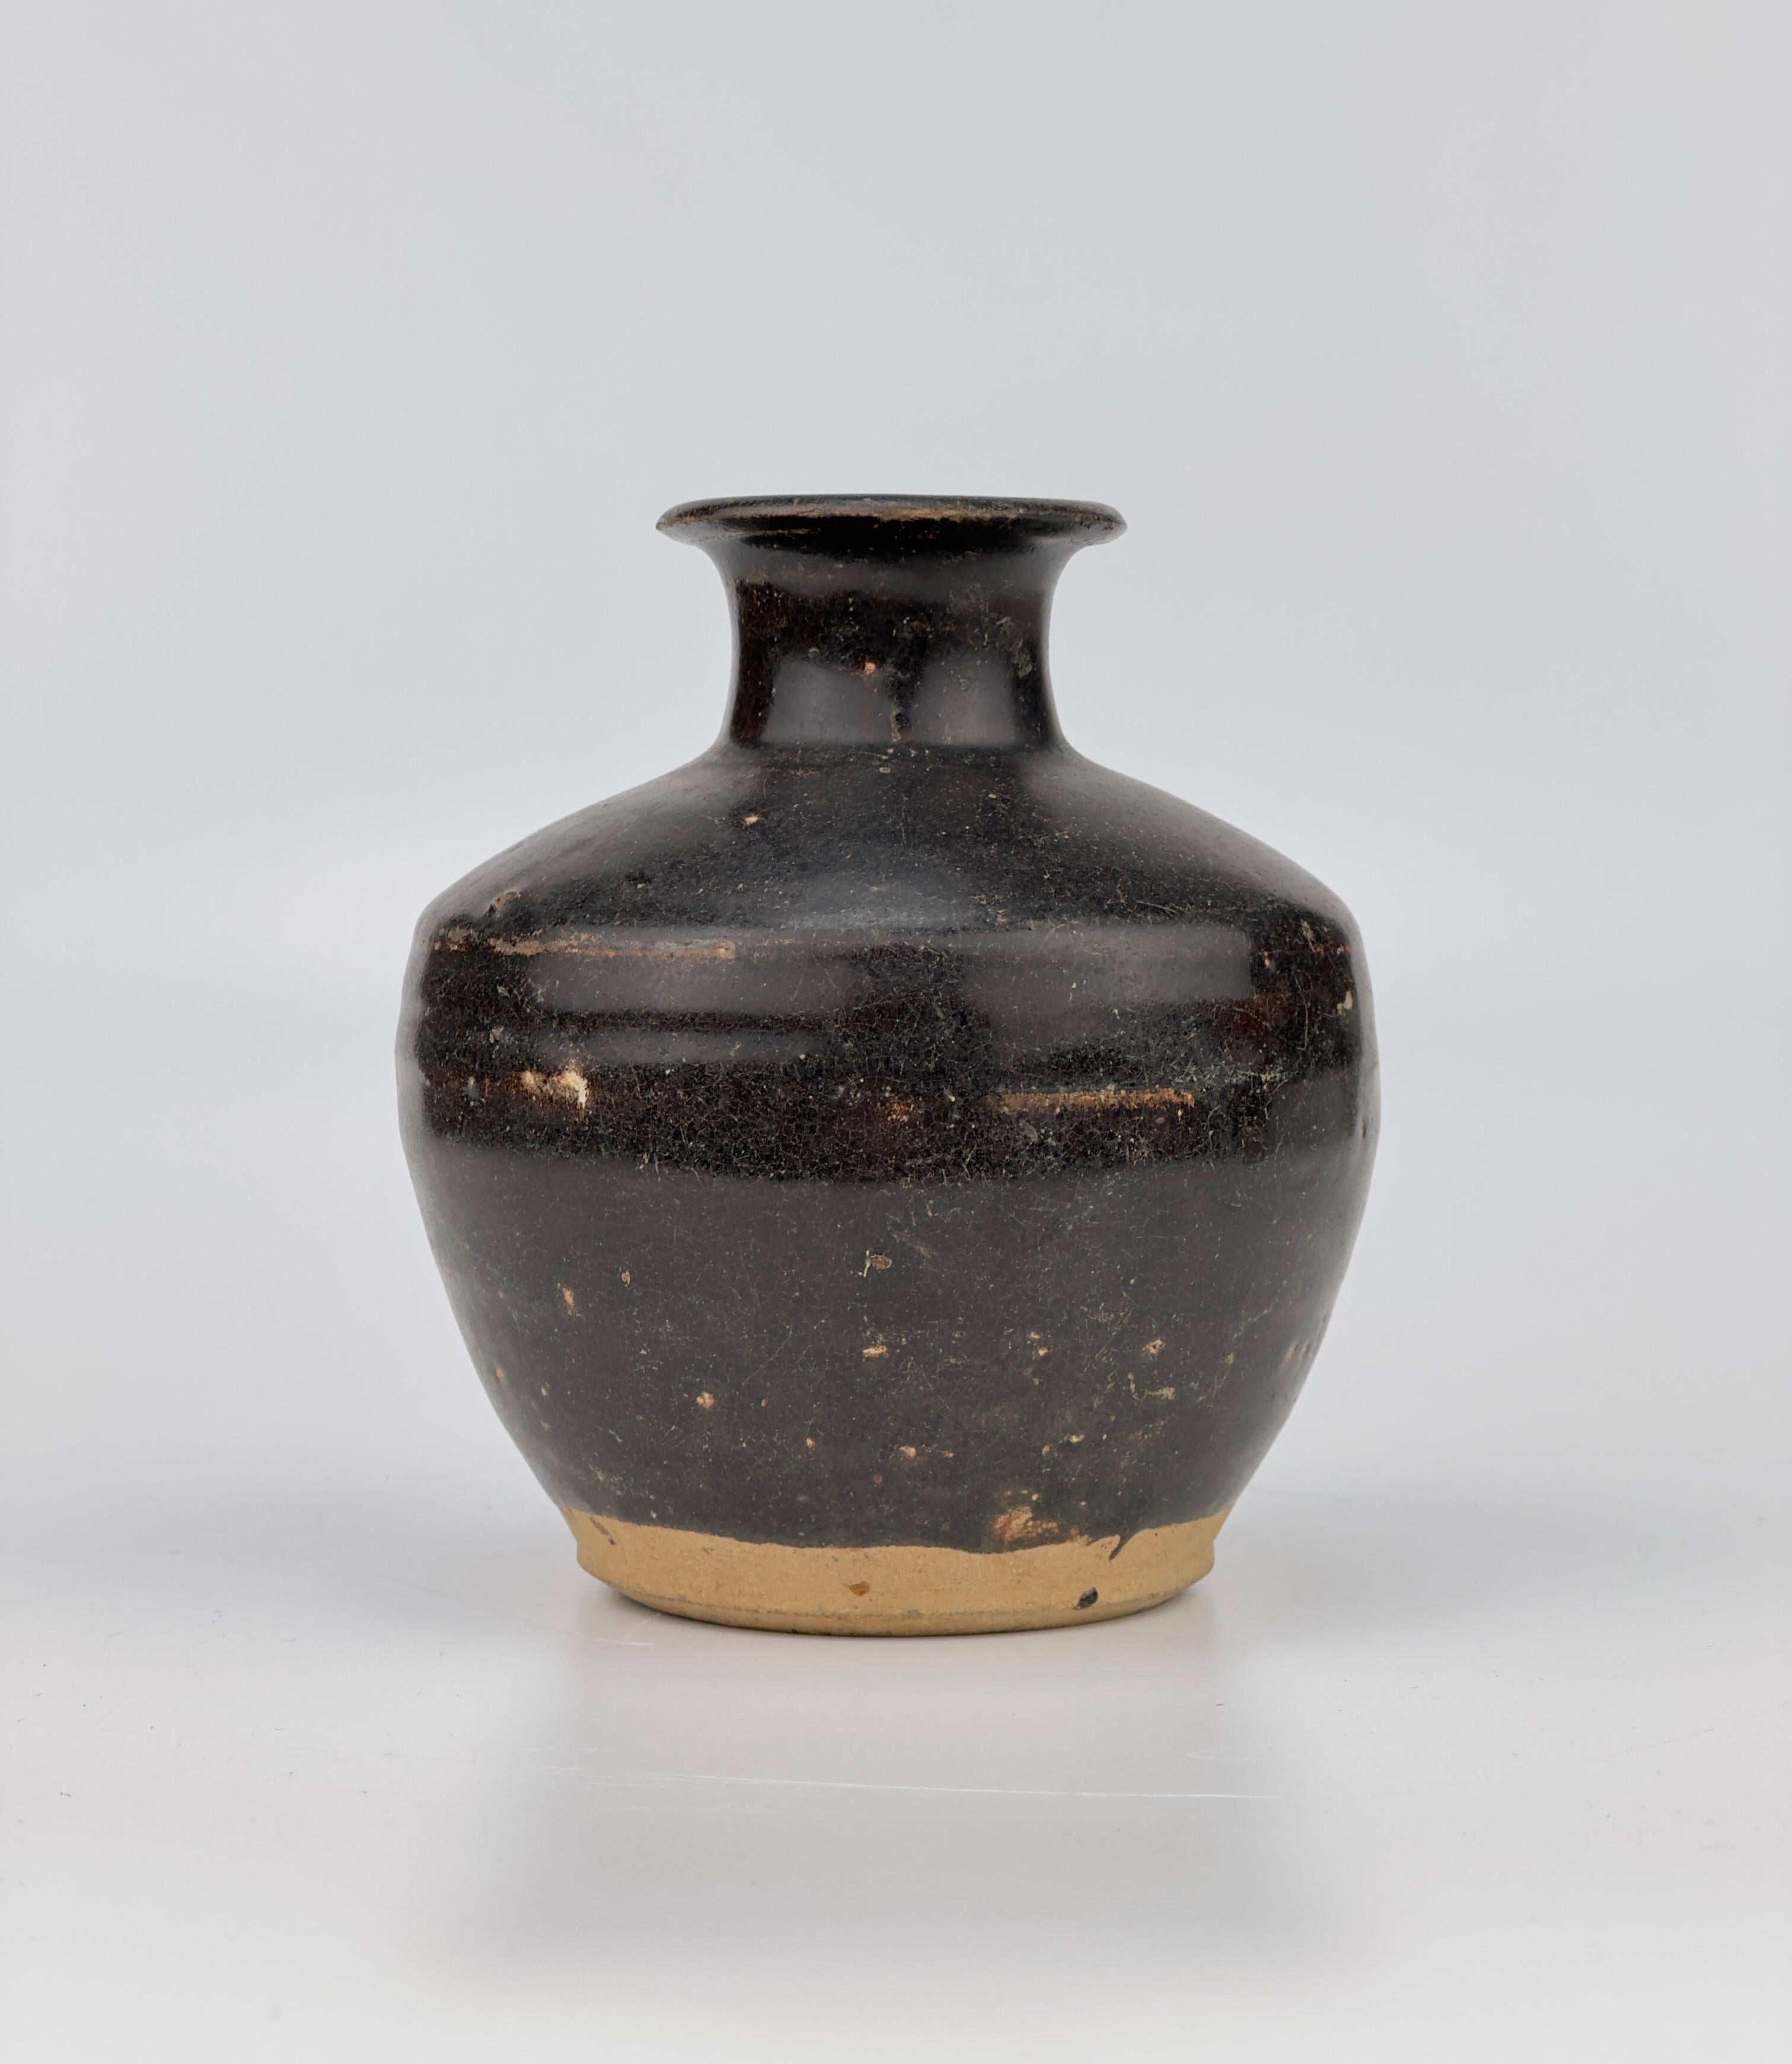 Black glazed bottle from the late Ming dynasty binh thuan cargo. An identical piece is included on page 146 of the Bin Thuan catalog titled 'The Age of Discovery: Asian Ceramics Found Along the Maritime Silk Road'.

Period: Ming Dynasty (16-17th